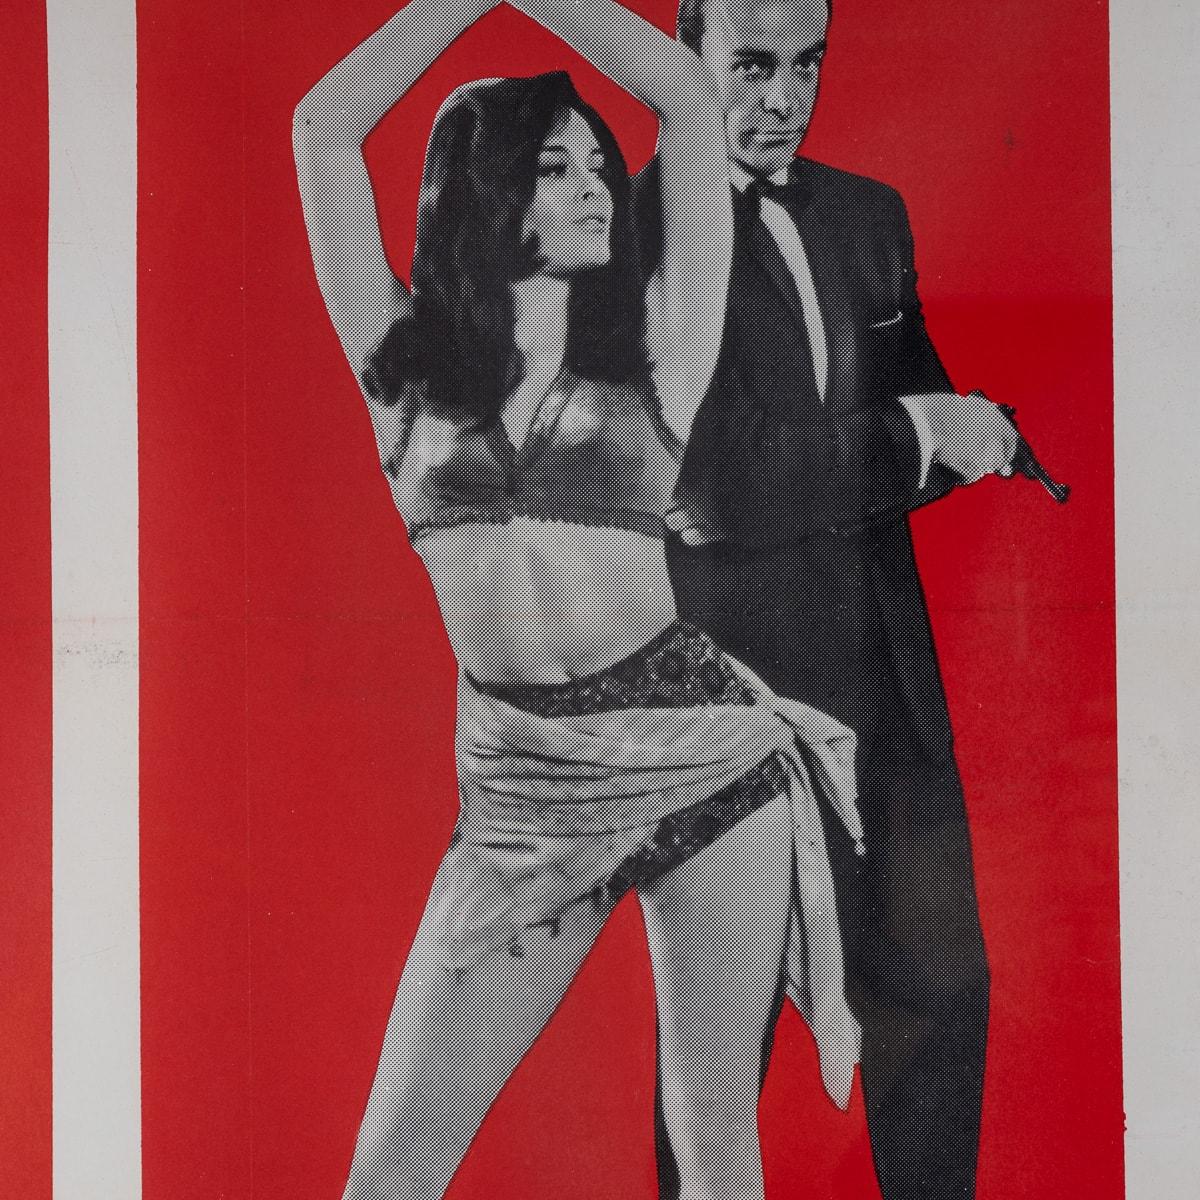 Original American (U.S) Release James Bond 'From Russia With Love' Poster c.1963 For Sale 1